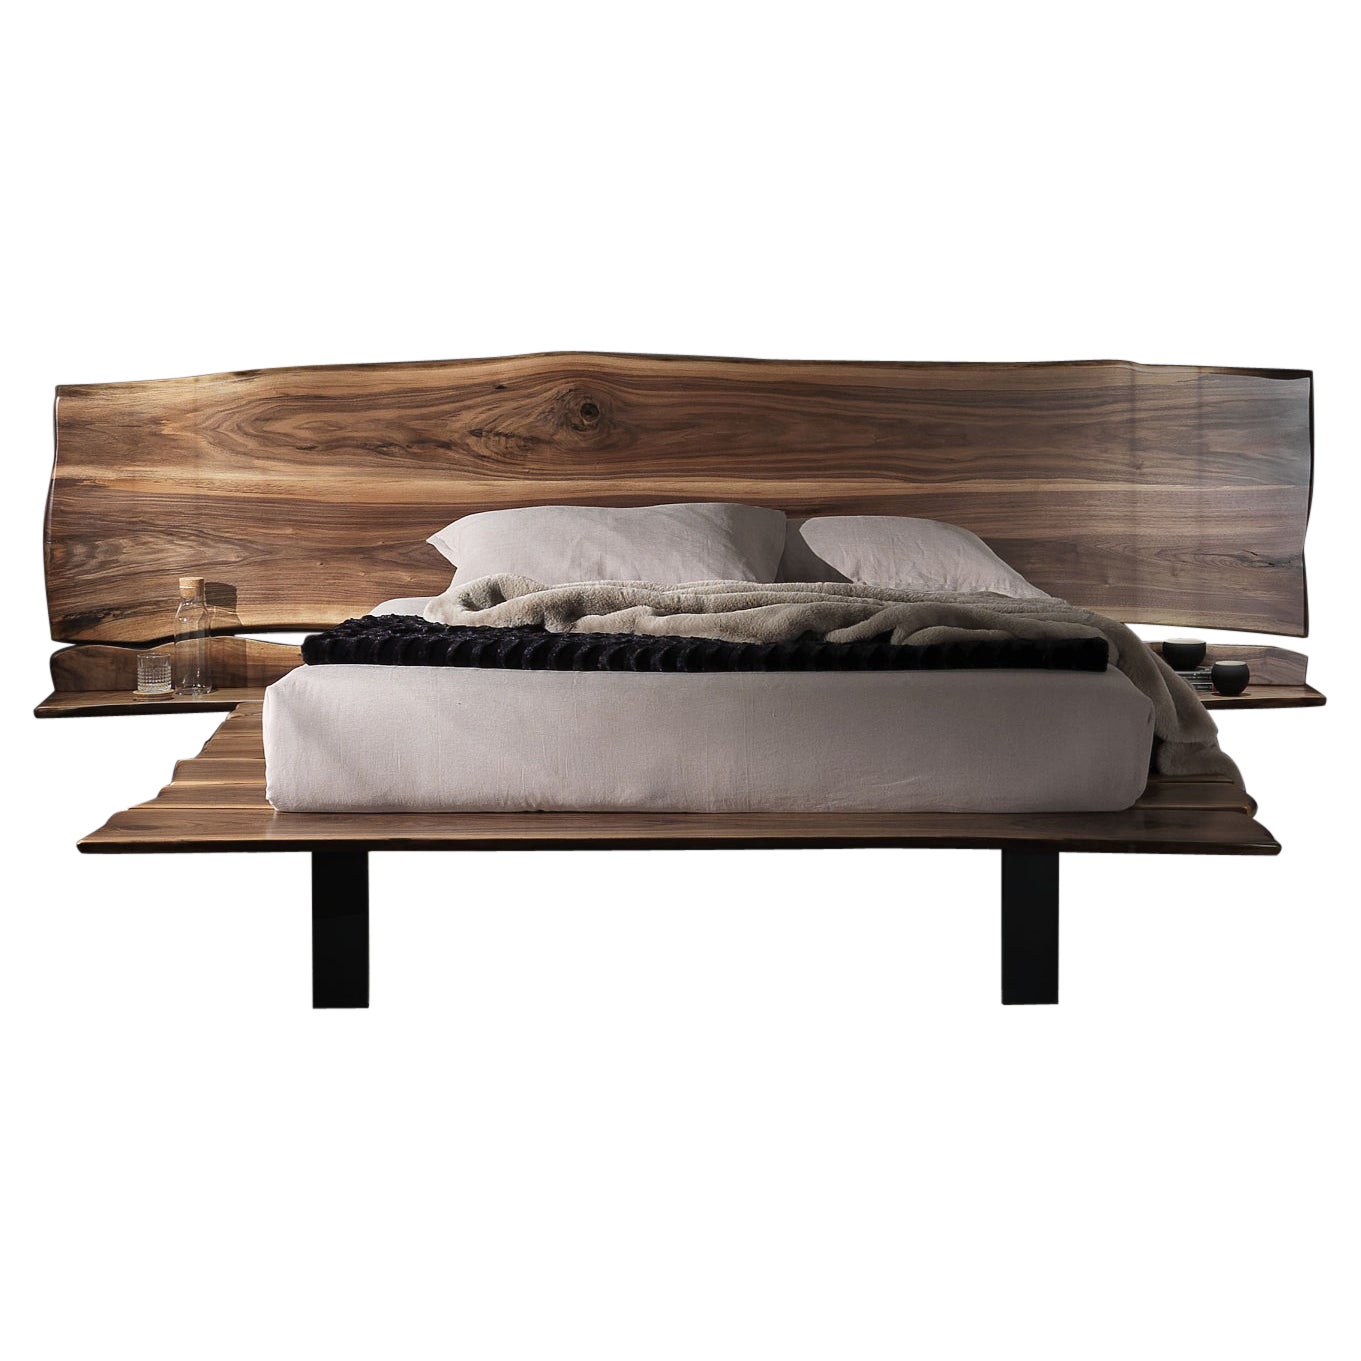 The Golden Age Double Bed by Francesco Profili